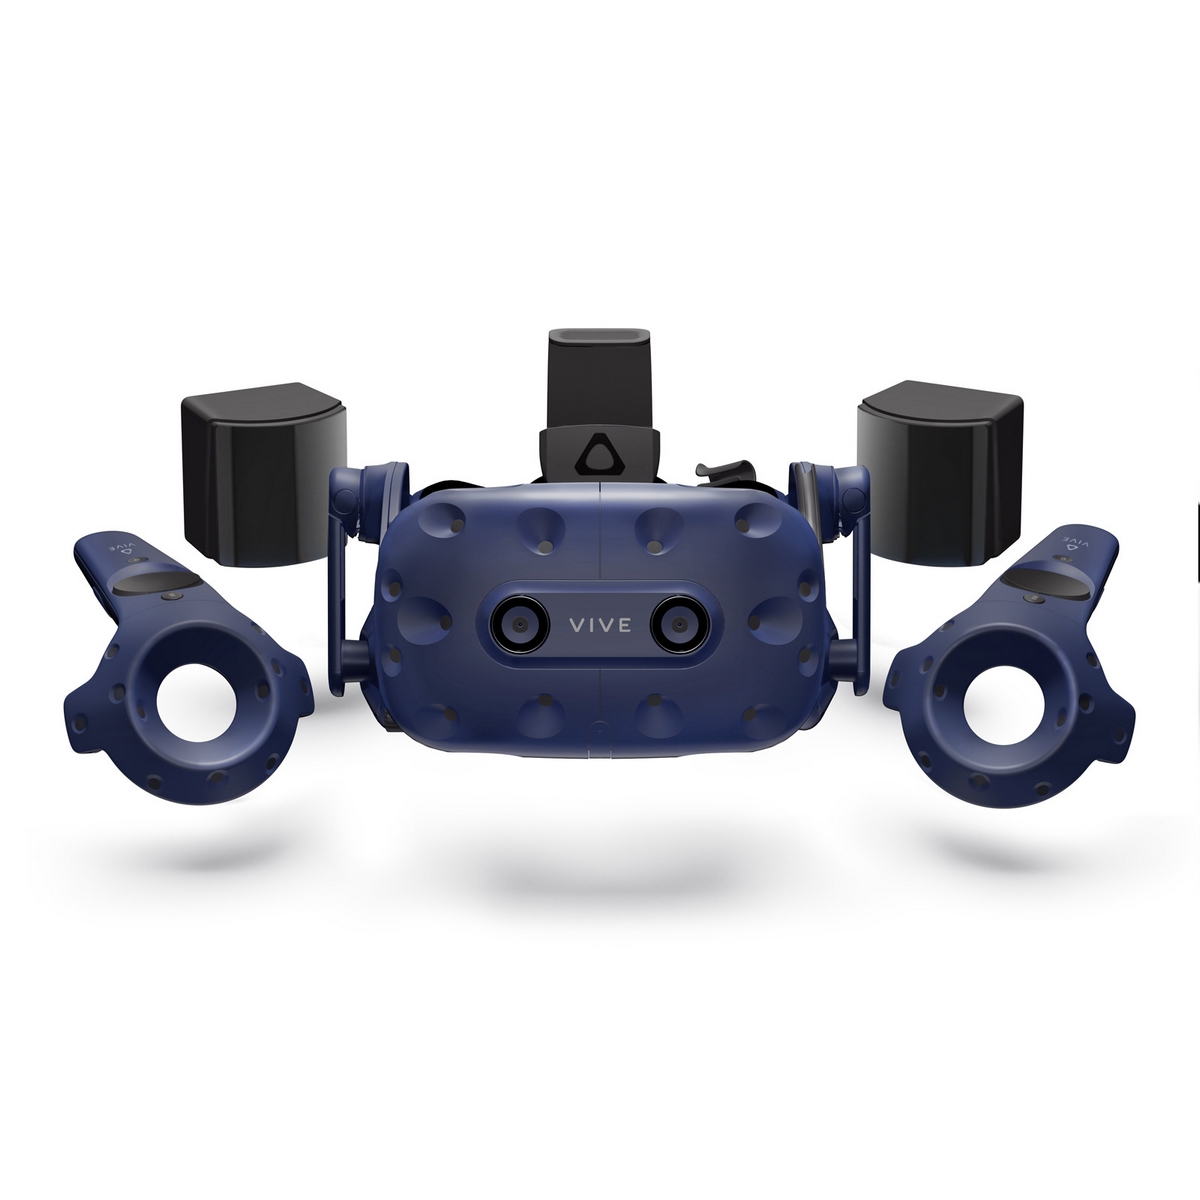 B Grade HTC VIVE PRO Full Kit - HD VR Headset Updated Controllers and 2.0 B